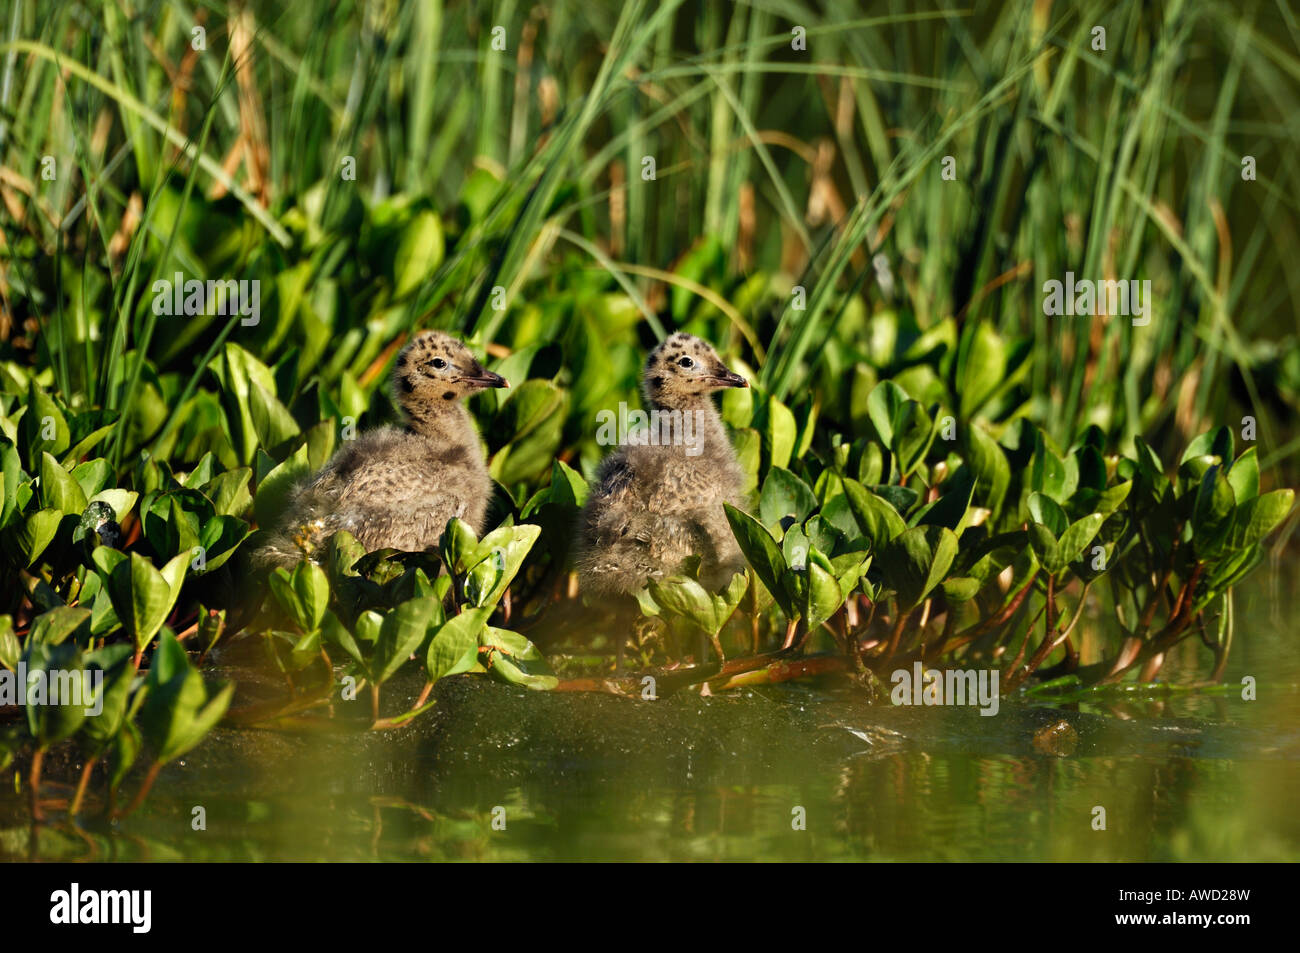 Common Gull or Mew Gull (Larus canus) young resting among Bog-beans (Menyanthes trifoliata), northern Norway, Scandinavia, Euro Stock Photo